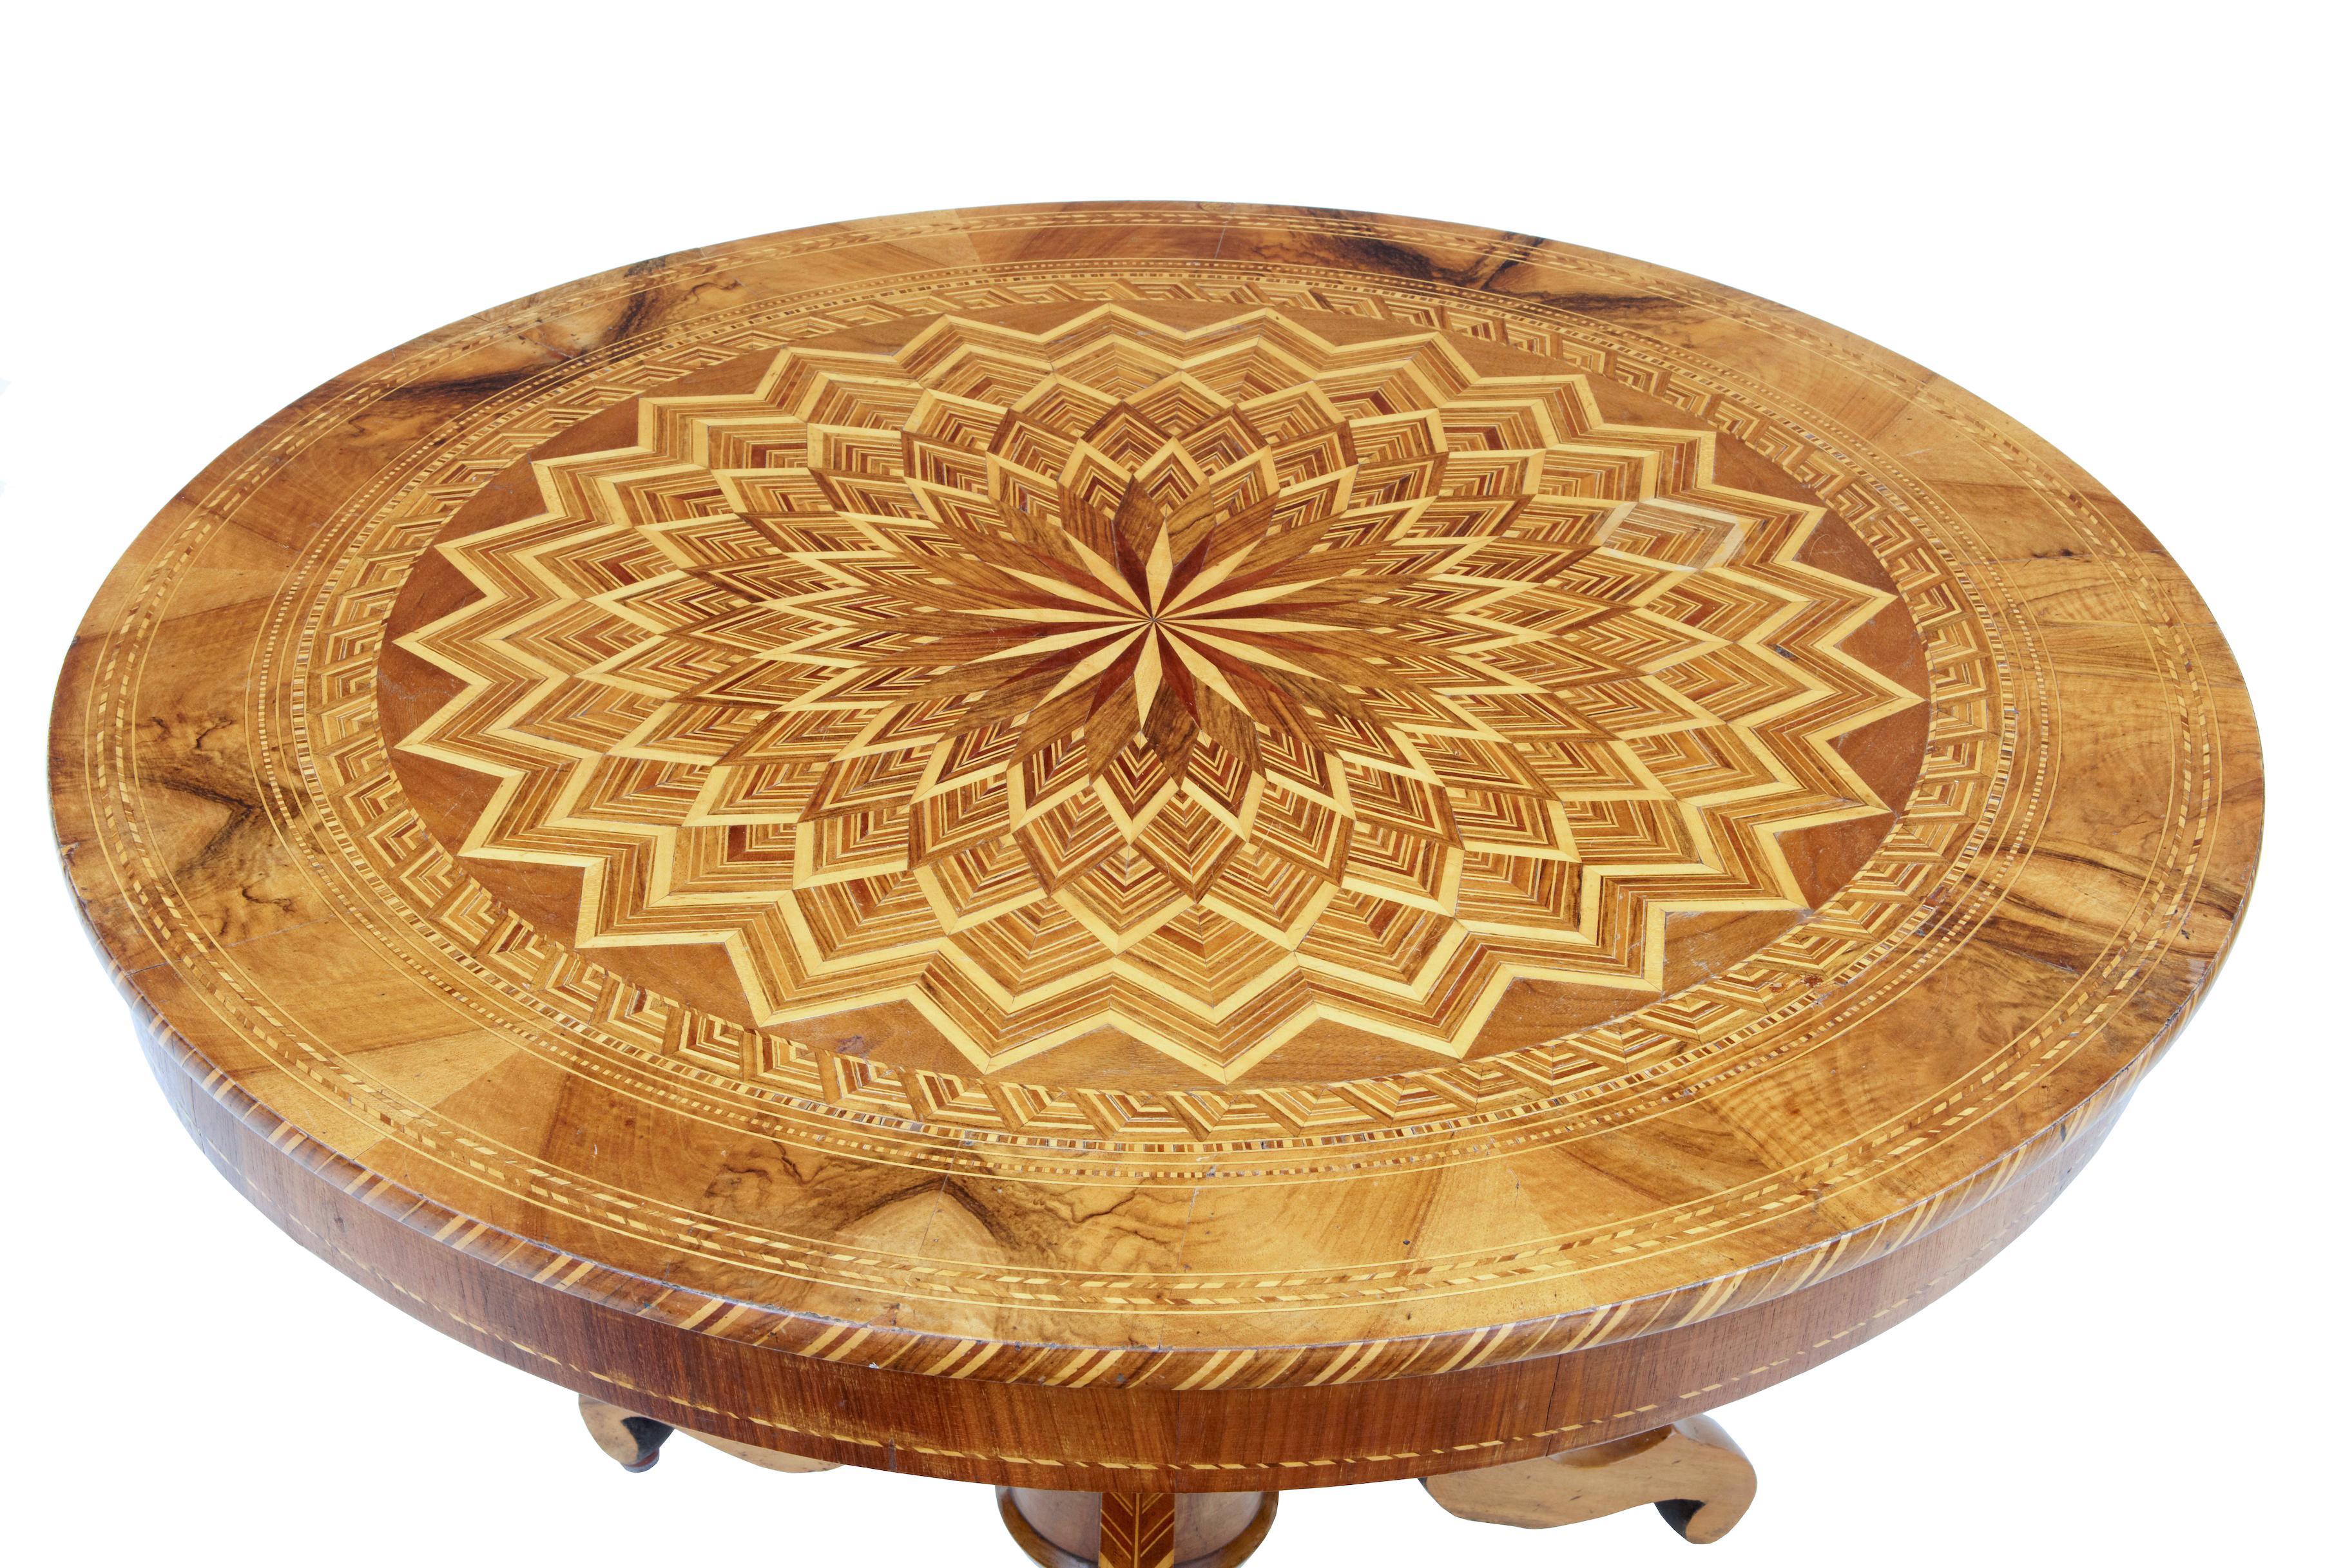 19th century inlaid walnut Sorrento center table, circa 1880.

Fine example of inlay and geometric parquetry. Top stands on a tripod base which continues the theme of inlay with exotic woods such as olive wood.

One area of repair to the outer